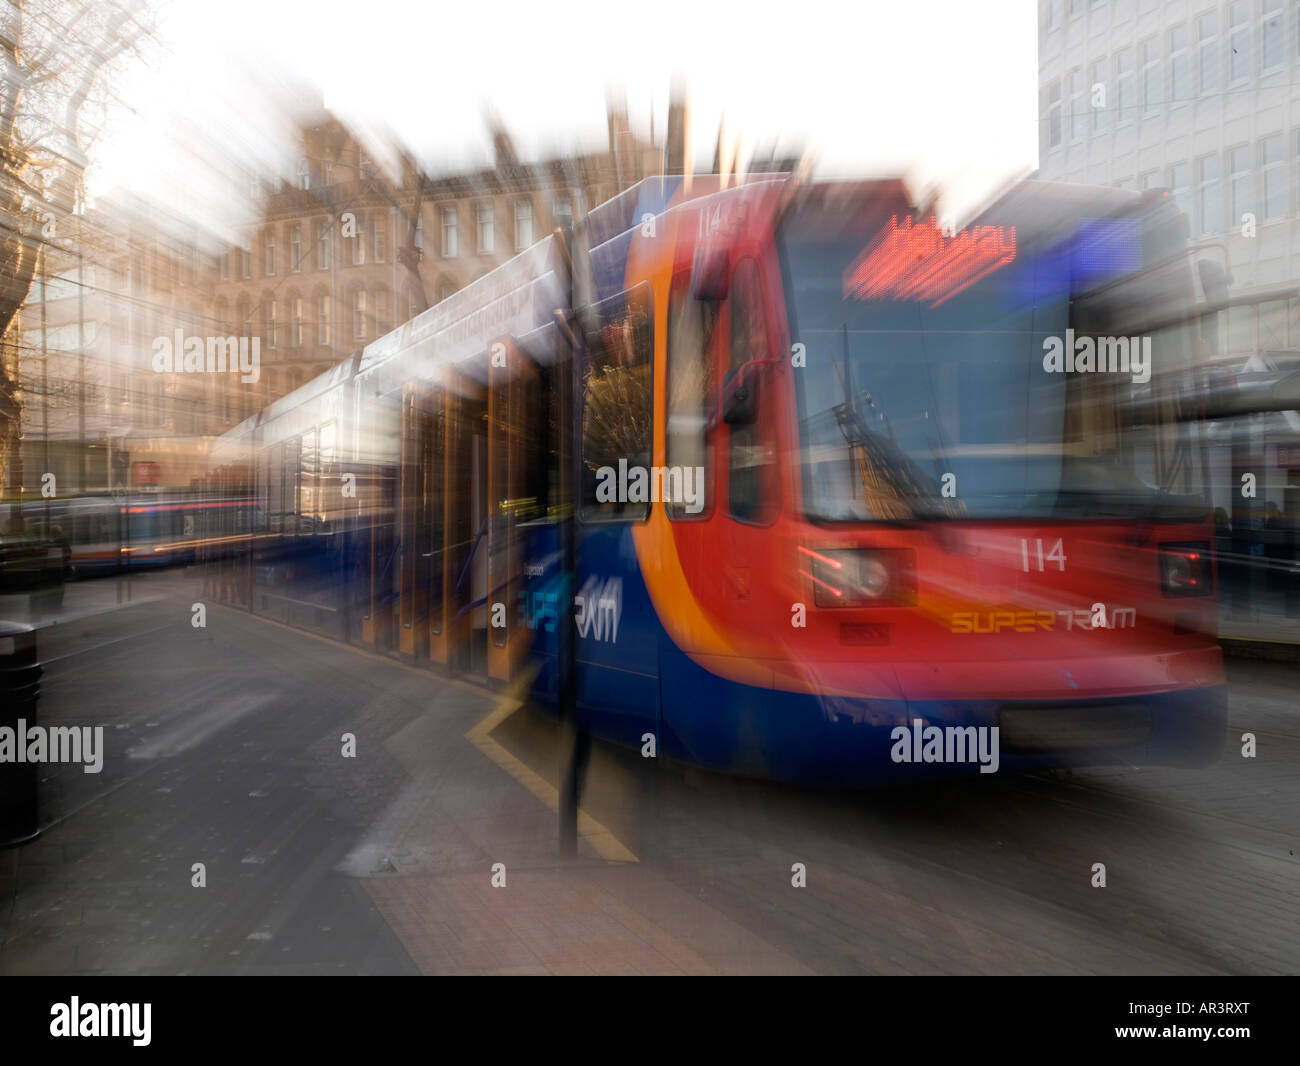 Supertram Sheffield, South Yorkshire,Northern England, tram moving and blurred Stock Photo